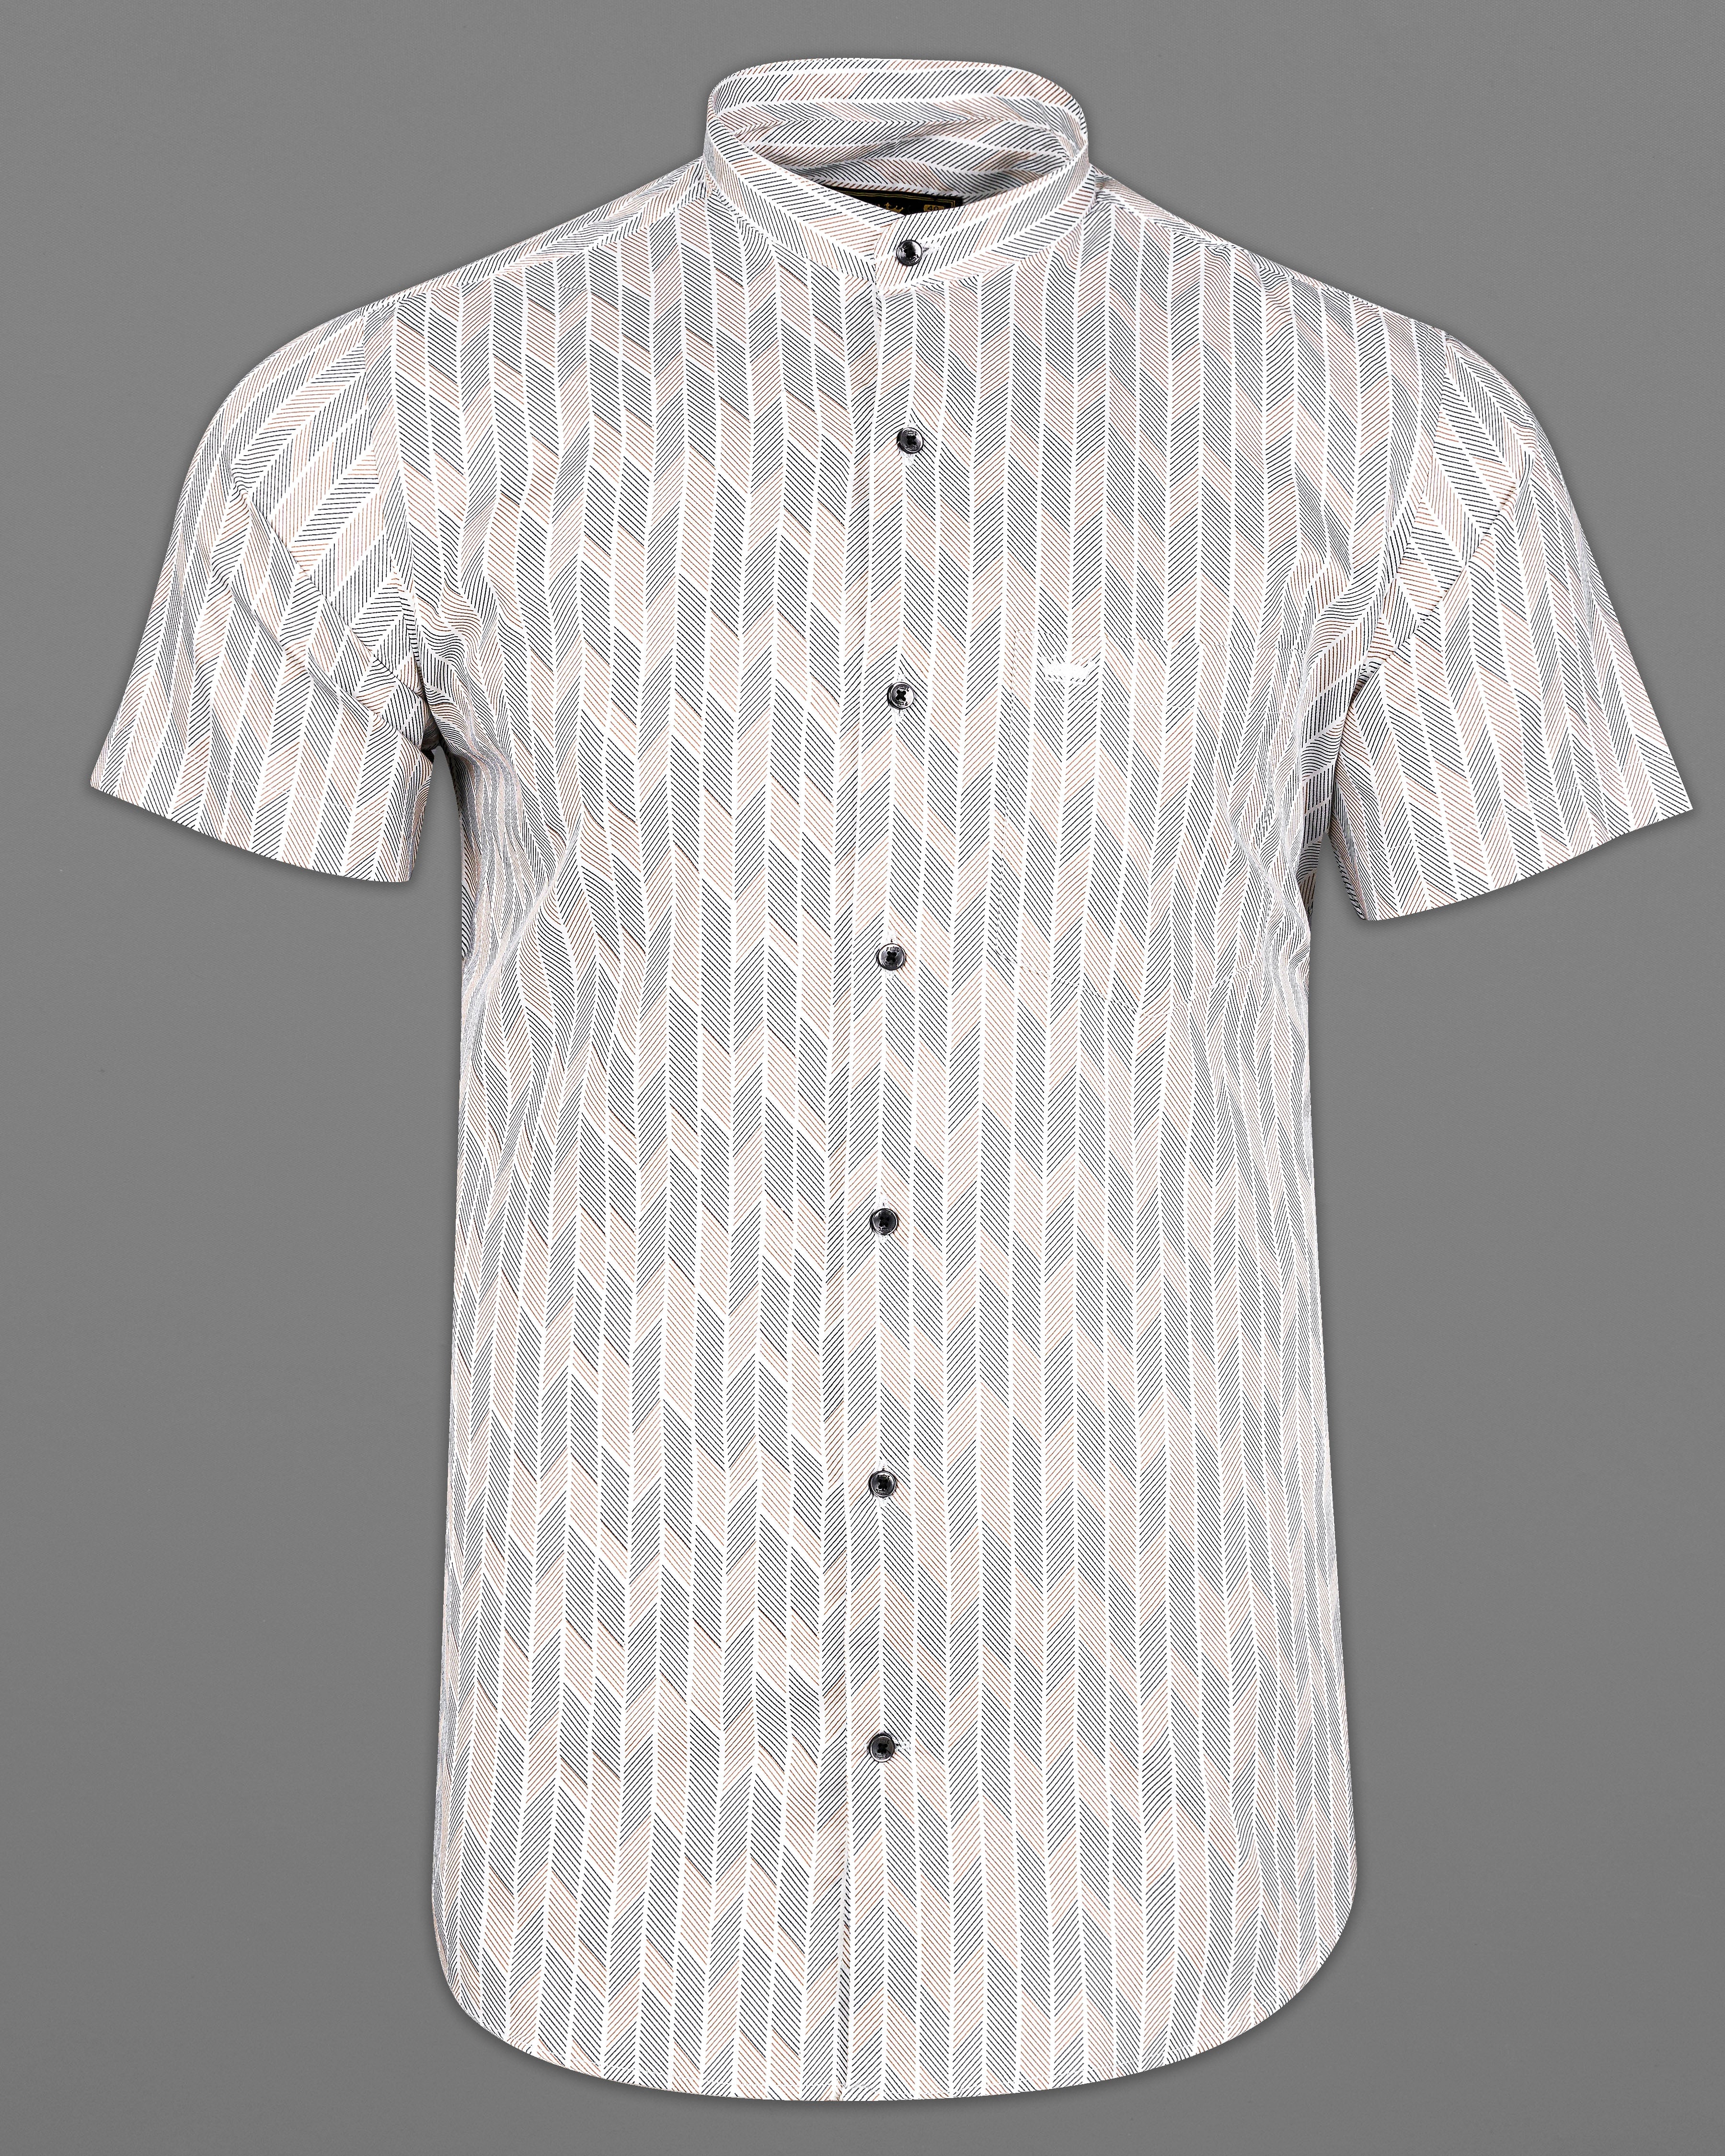 Bright White with Chestnut Brown and Flint Gray Super Soft Premium Cotton Half Sleeves Shirt 9639-M-BLK-SS-H-38, 9639-M-BLK-SS-H-39, 9639-M-BLK-SS-H-40, 9639-M-BLK-SS-H-42, 9639-M-BLK-SS-H-44, 9639-M-BLK-SS-H-46, 9639-M-BLK-SS-H-48, 9639-M-BLK-SS-H-50, 9639-M-BLK-SS-H-52